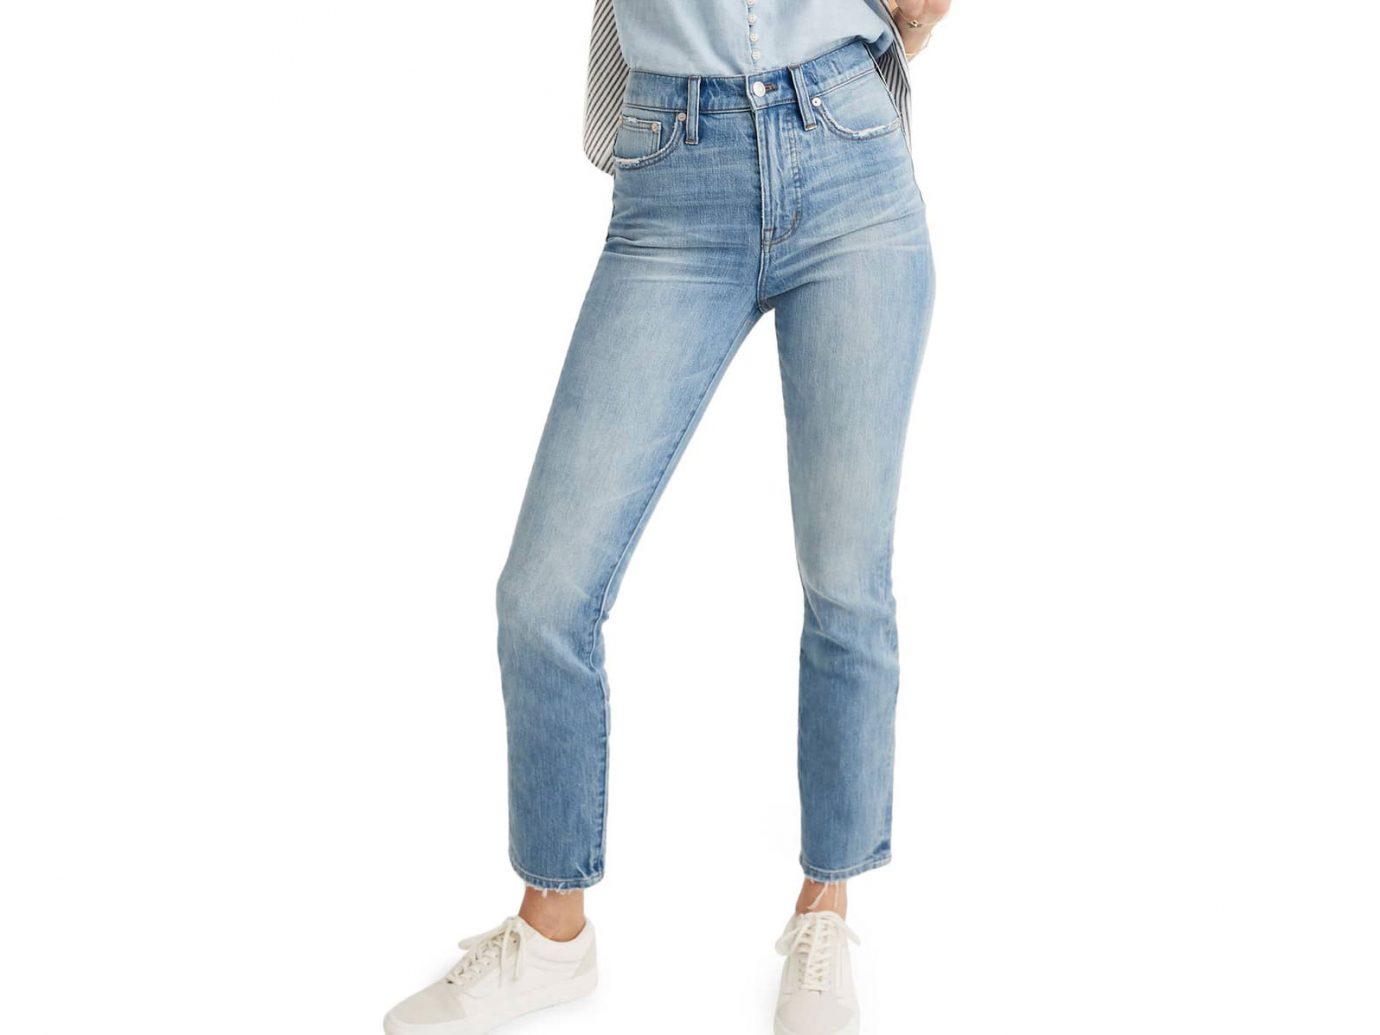 Madewell The Perfect Vintage Heart Patch High Waist Jeans